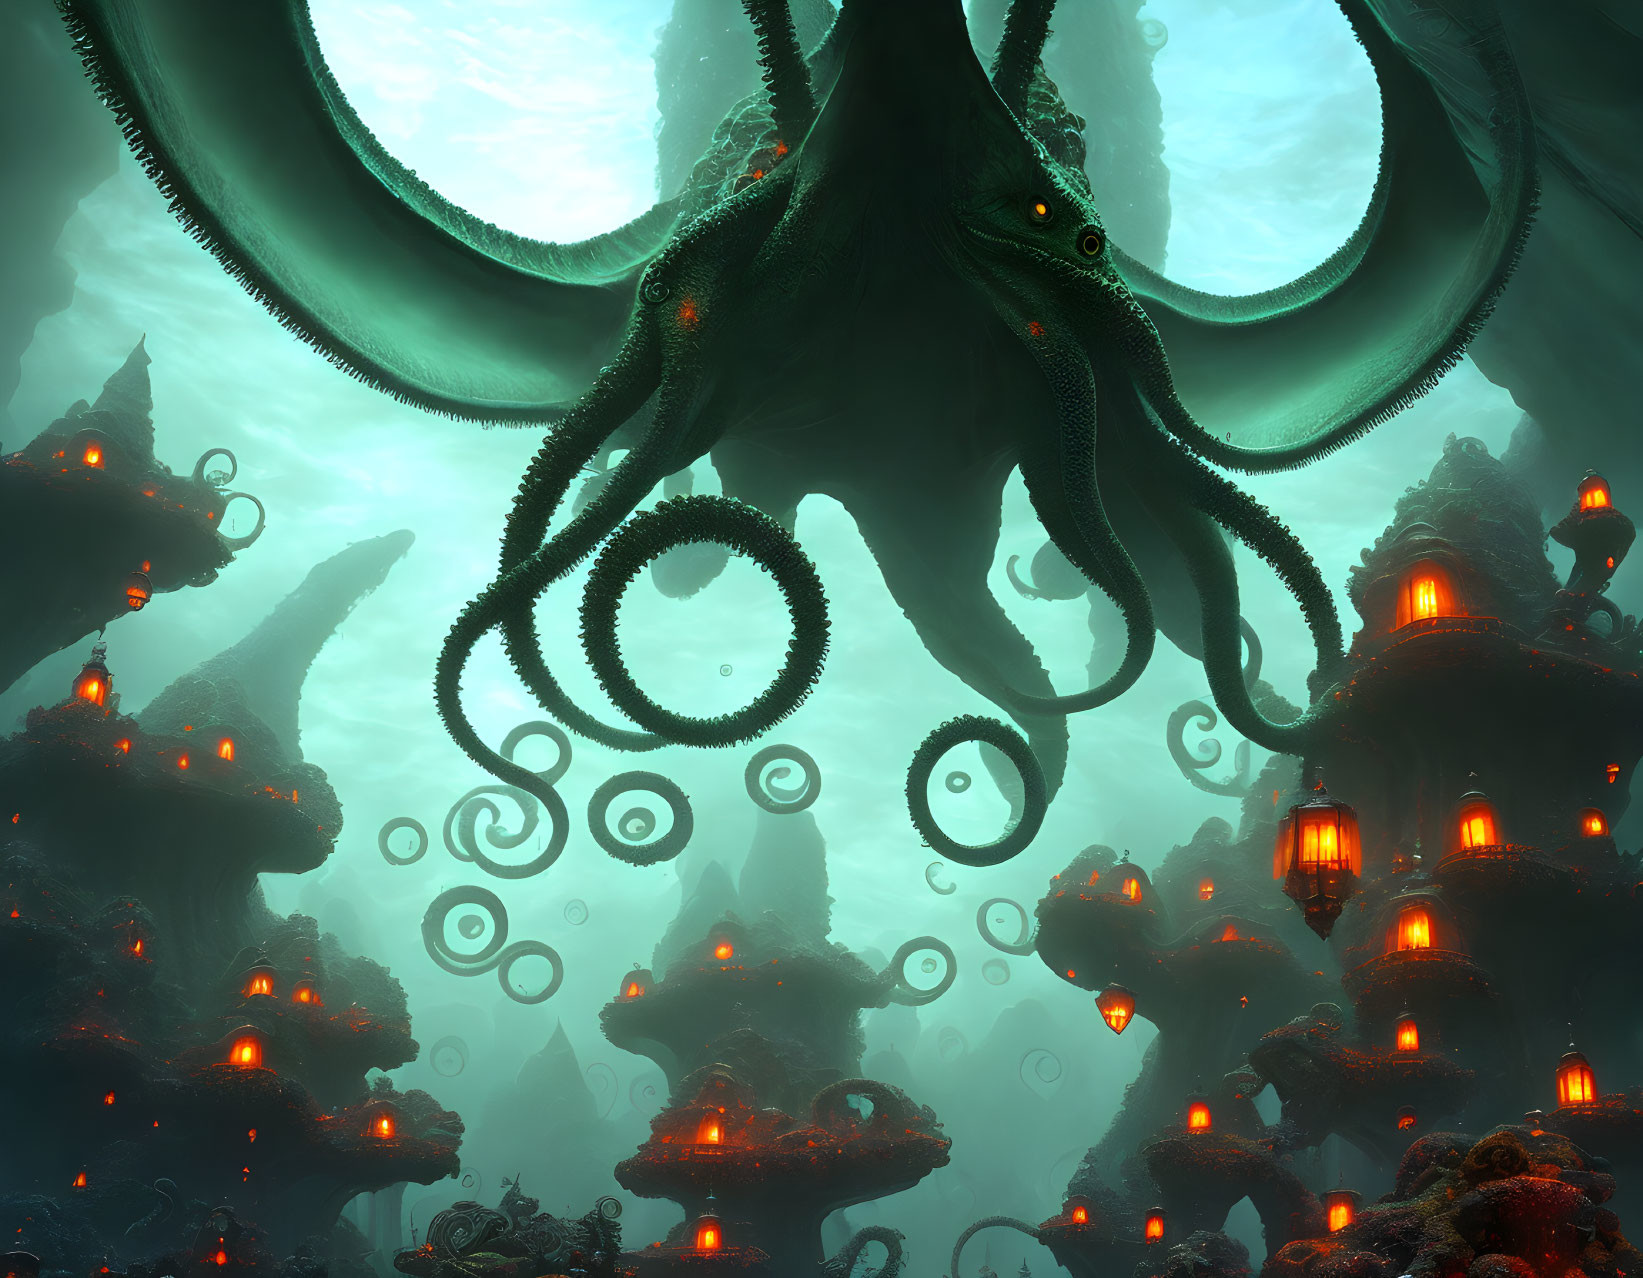 Giant octopus in underwater scene with glowing lights and twisting tentacles